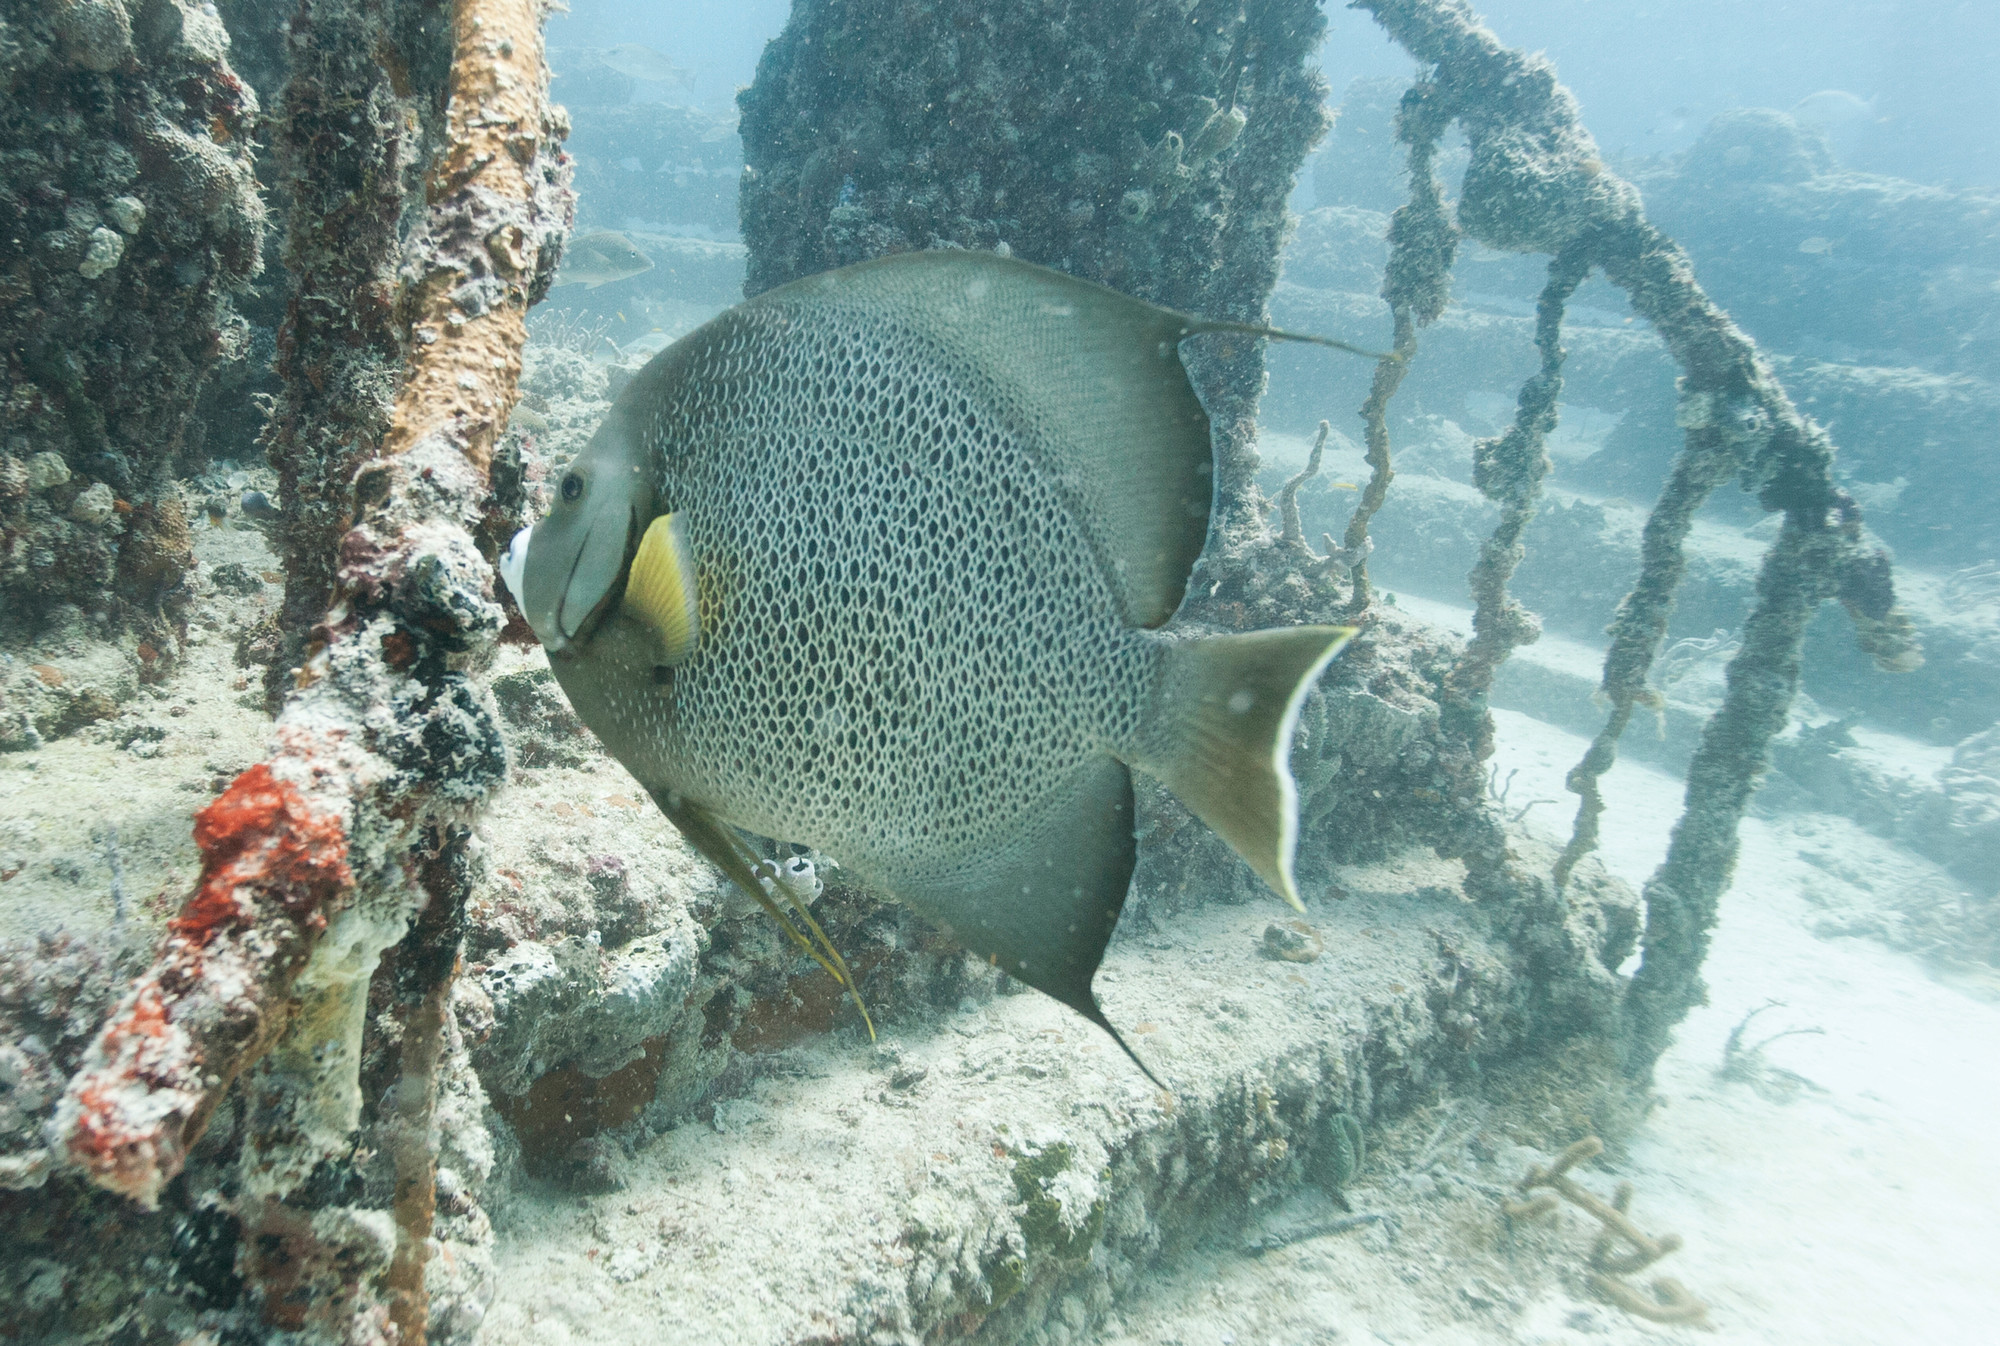 A large gray angelfish swims near a stairway at the reef.